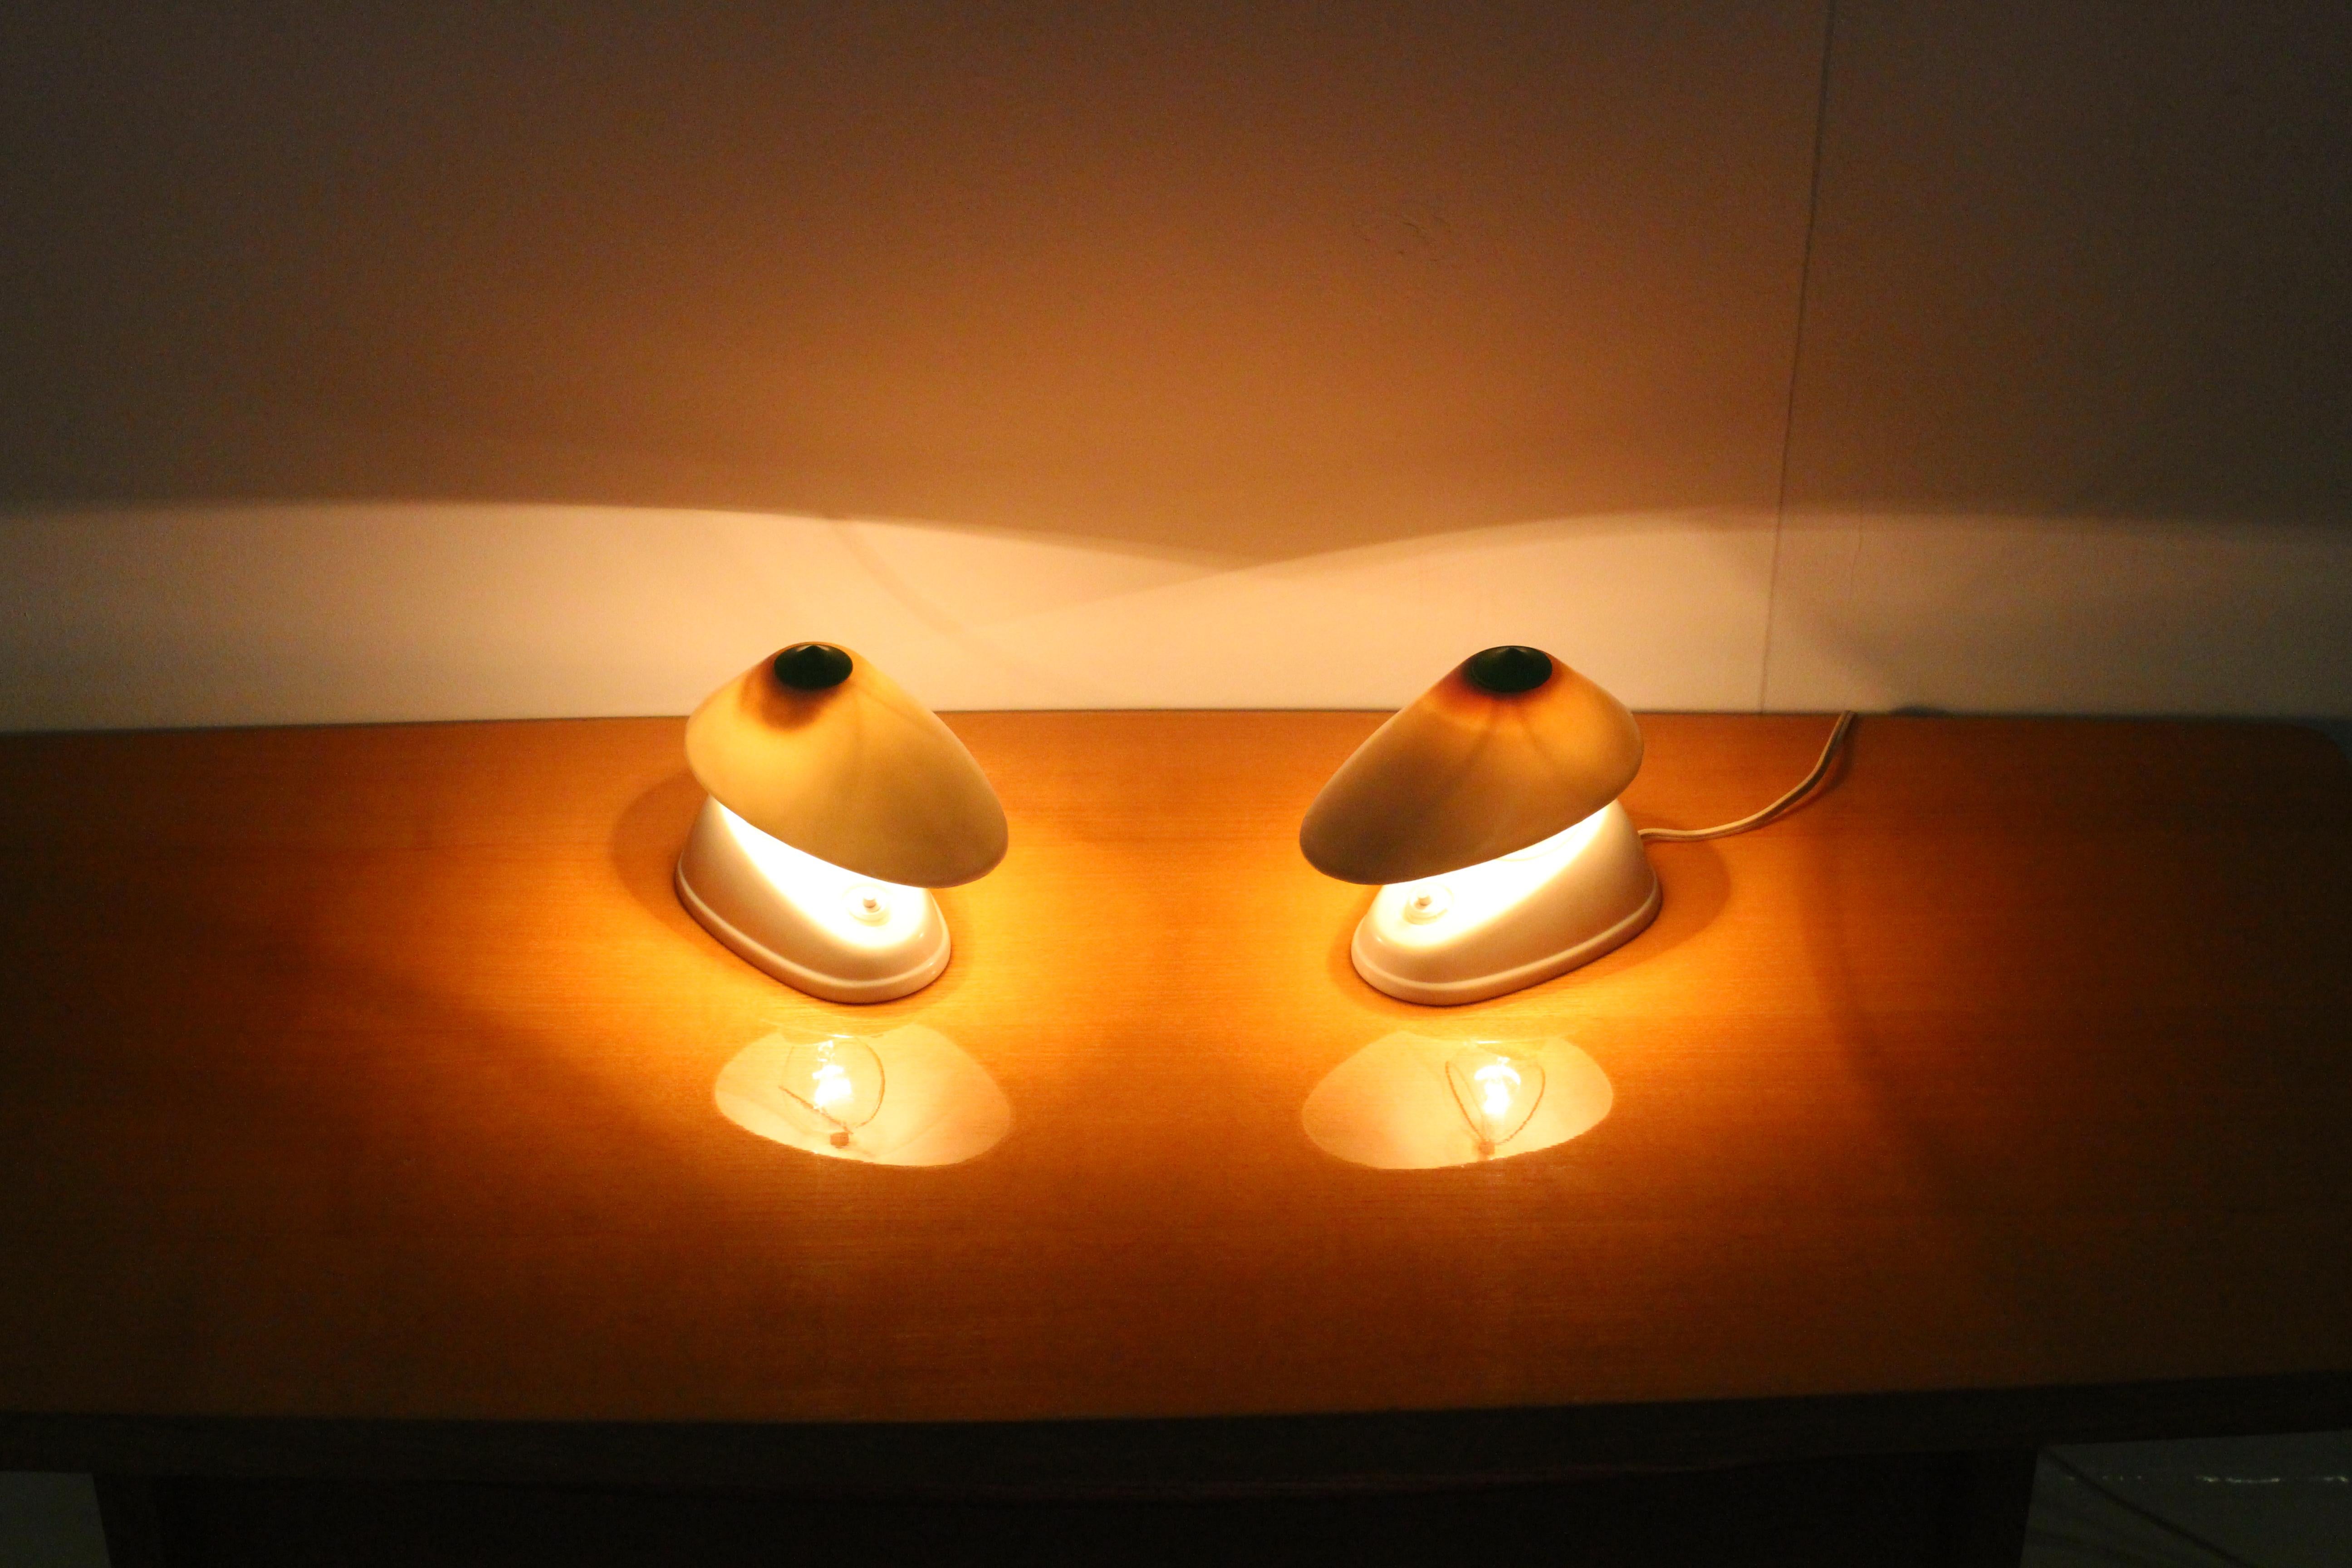 Czech Pair of Midcentury Table or Wall Lamps, 1960s For Sale